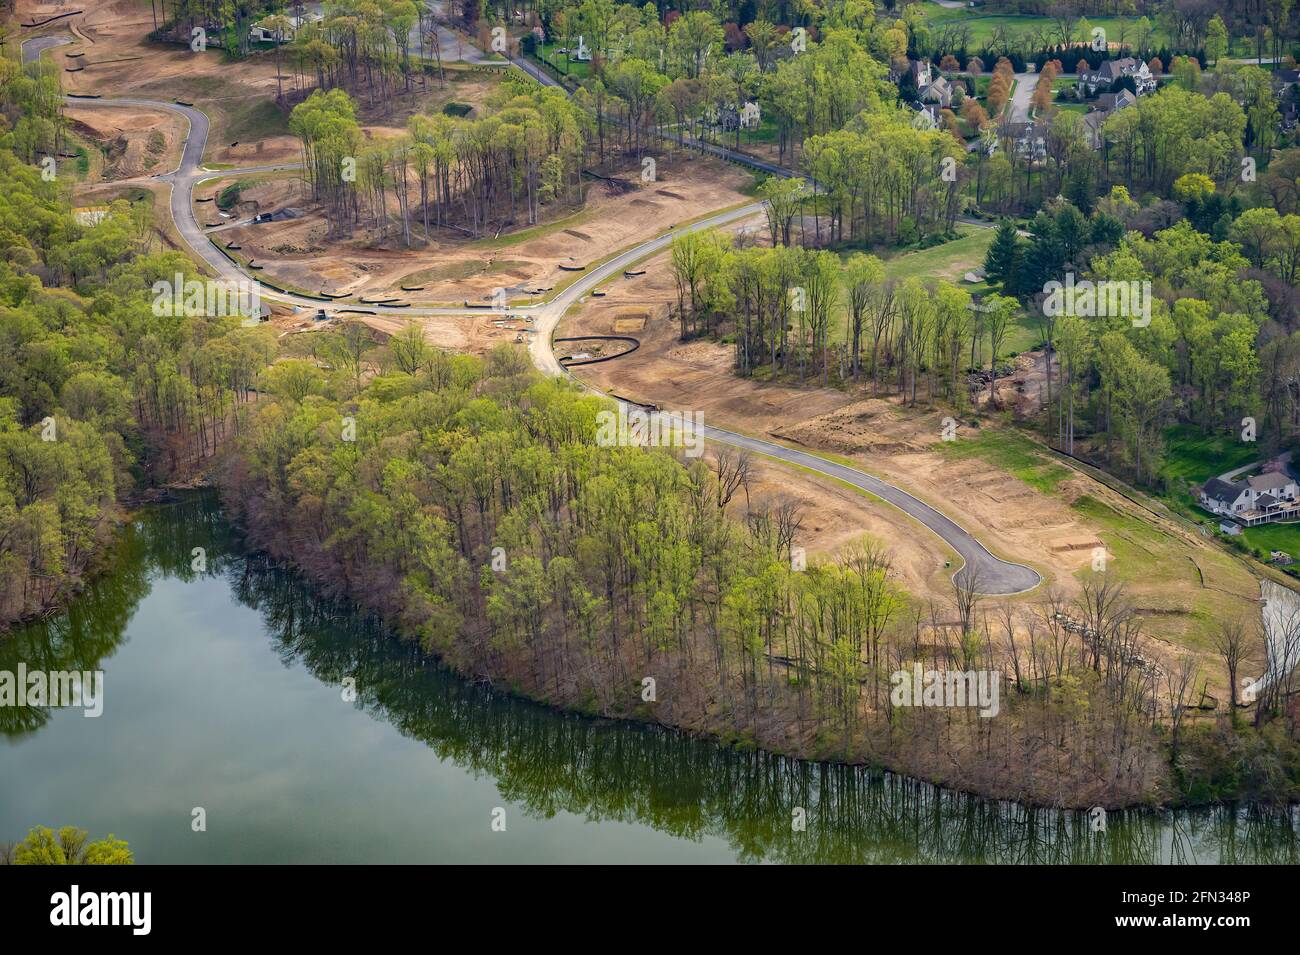 Land cleared with new road and cut de sac for new housing neighborhood development Stock Photo